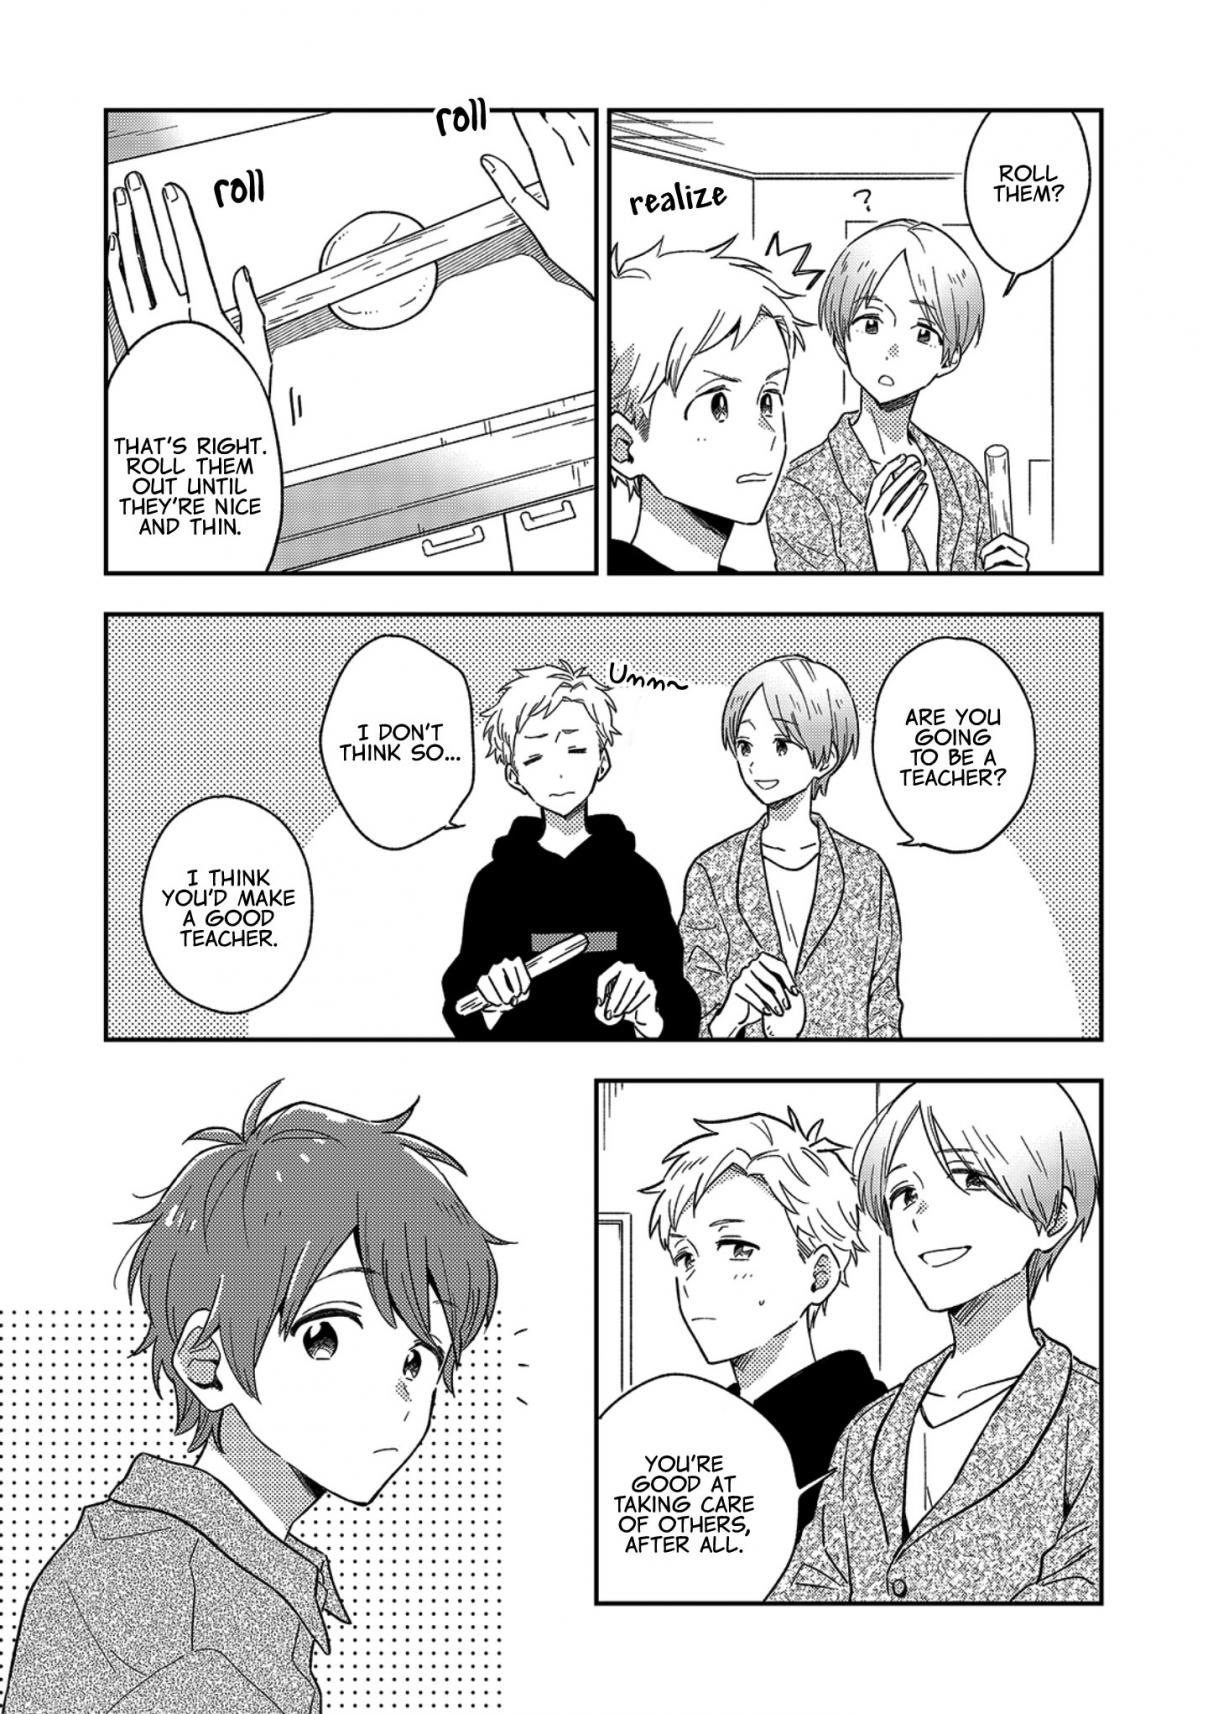 High School Boys Are Hungry Again Today Vol. 1 Ch. 14 Gyoza Party